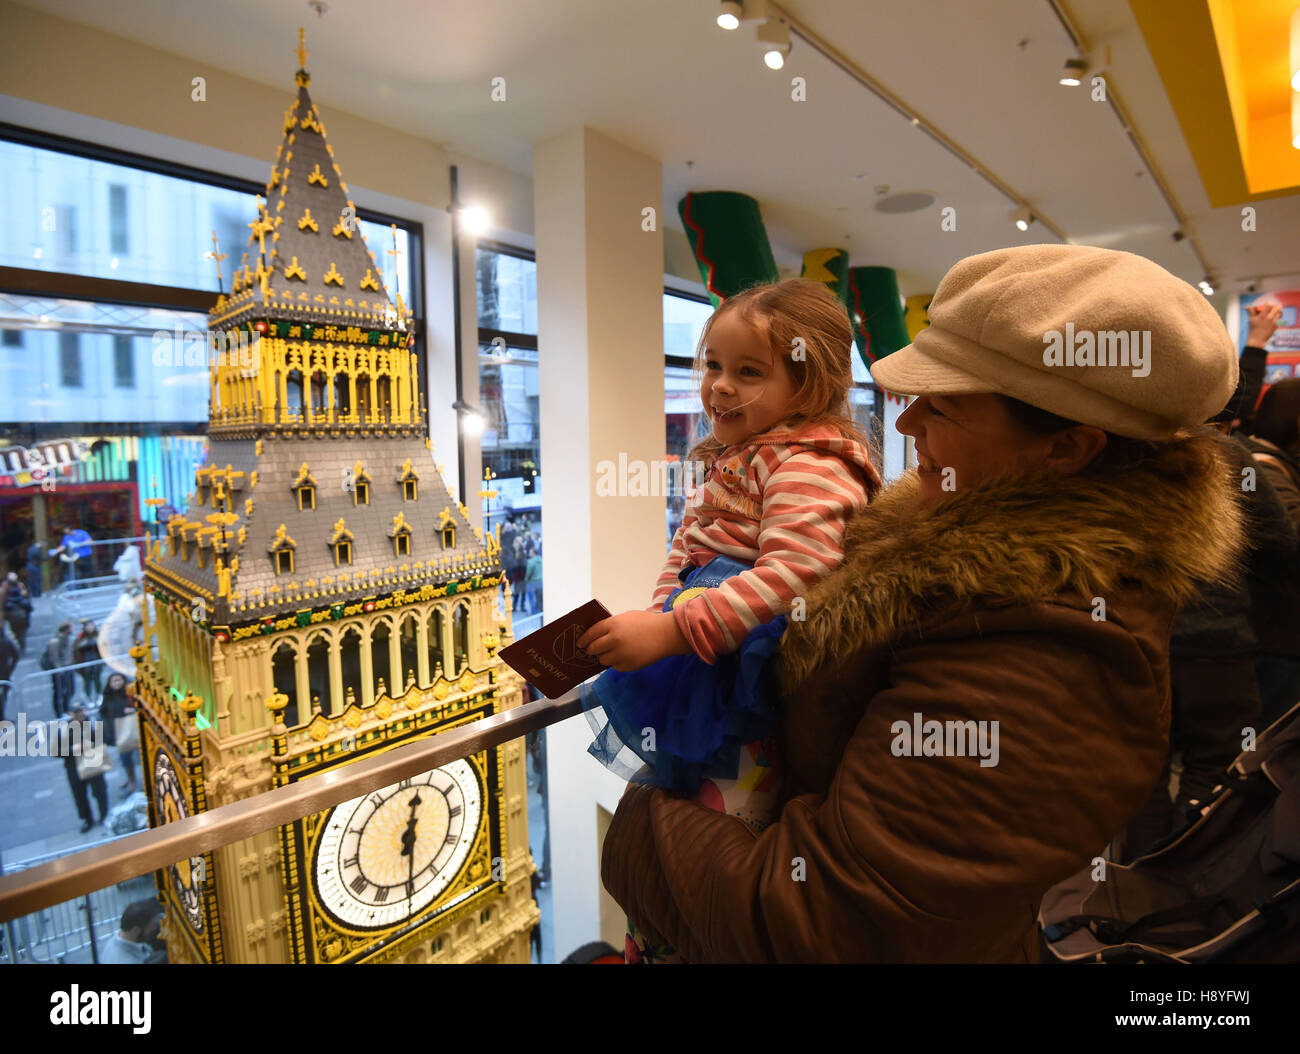 Keira (no age given) is held up to see a Lego model of Big Ben inside the 'world's largest Lego store' in Leicester Square, London. Stock Photo